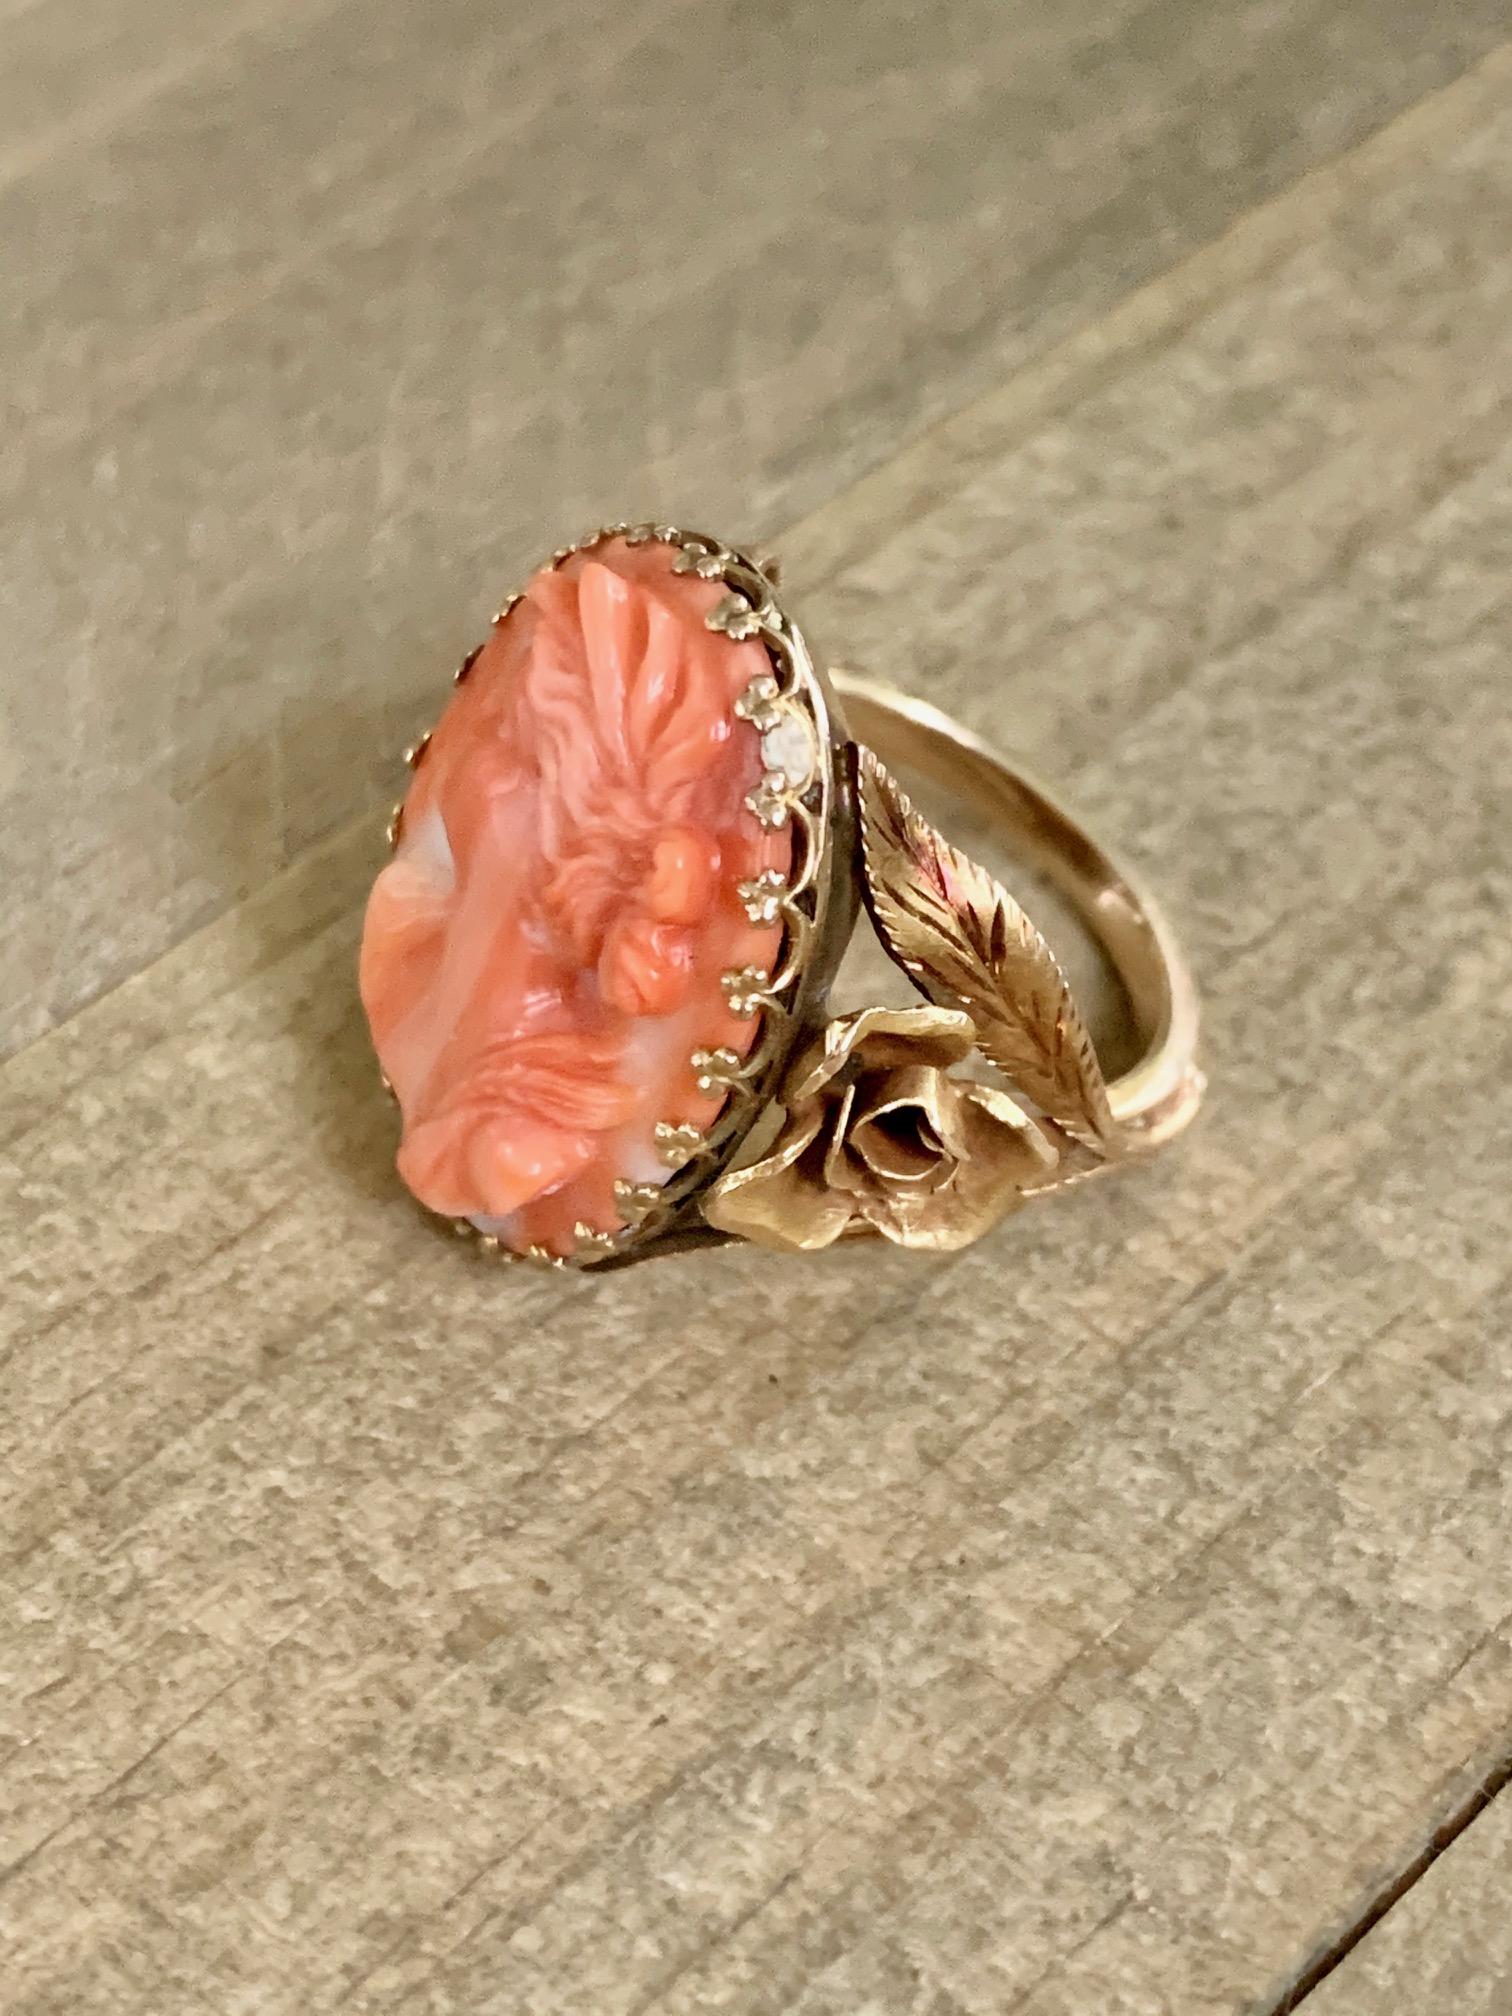 This fabulous vintage 14 karat yellow gold Salmon Coral Cameo ring has beautiful gold flowers carved on either side of the cameo.

This ring features:
1 oval coral cameo featuring a woman's profile.

Weight:  8.5 grams
Size: 5 3/4

This piece is so